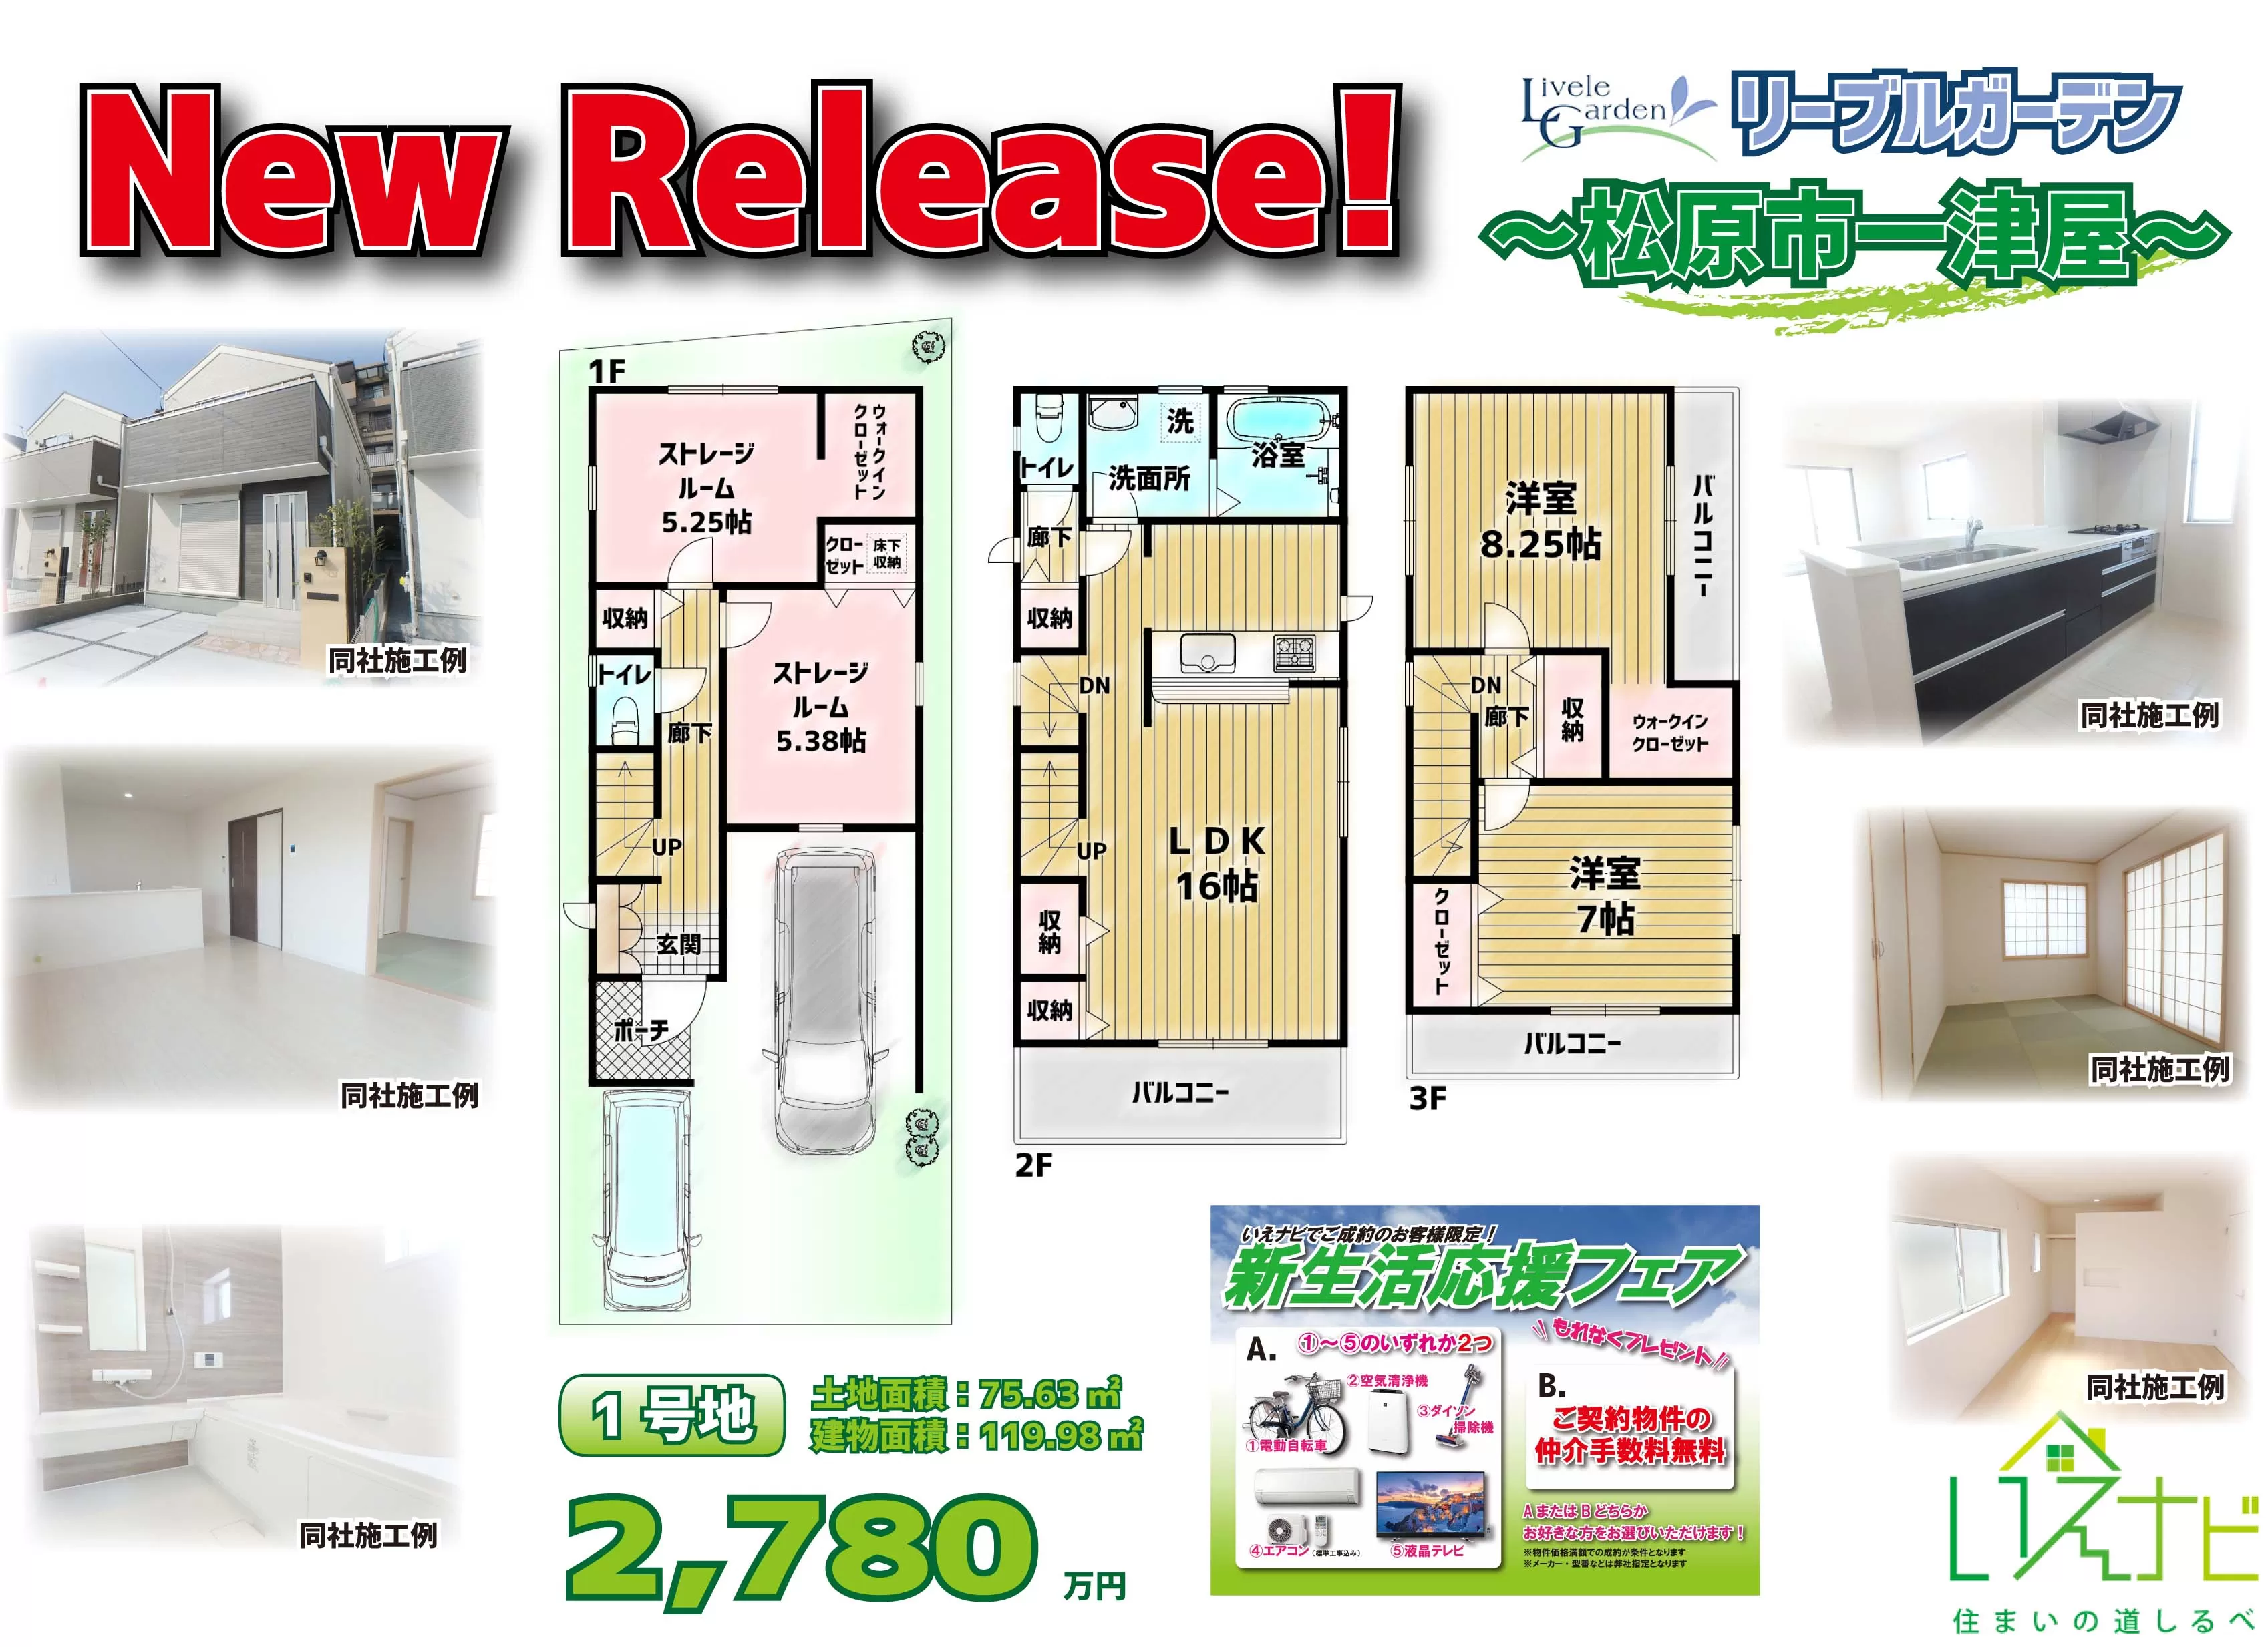 New Release ～リーブルガーデン松原市一津屋～